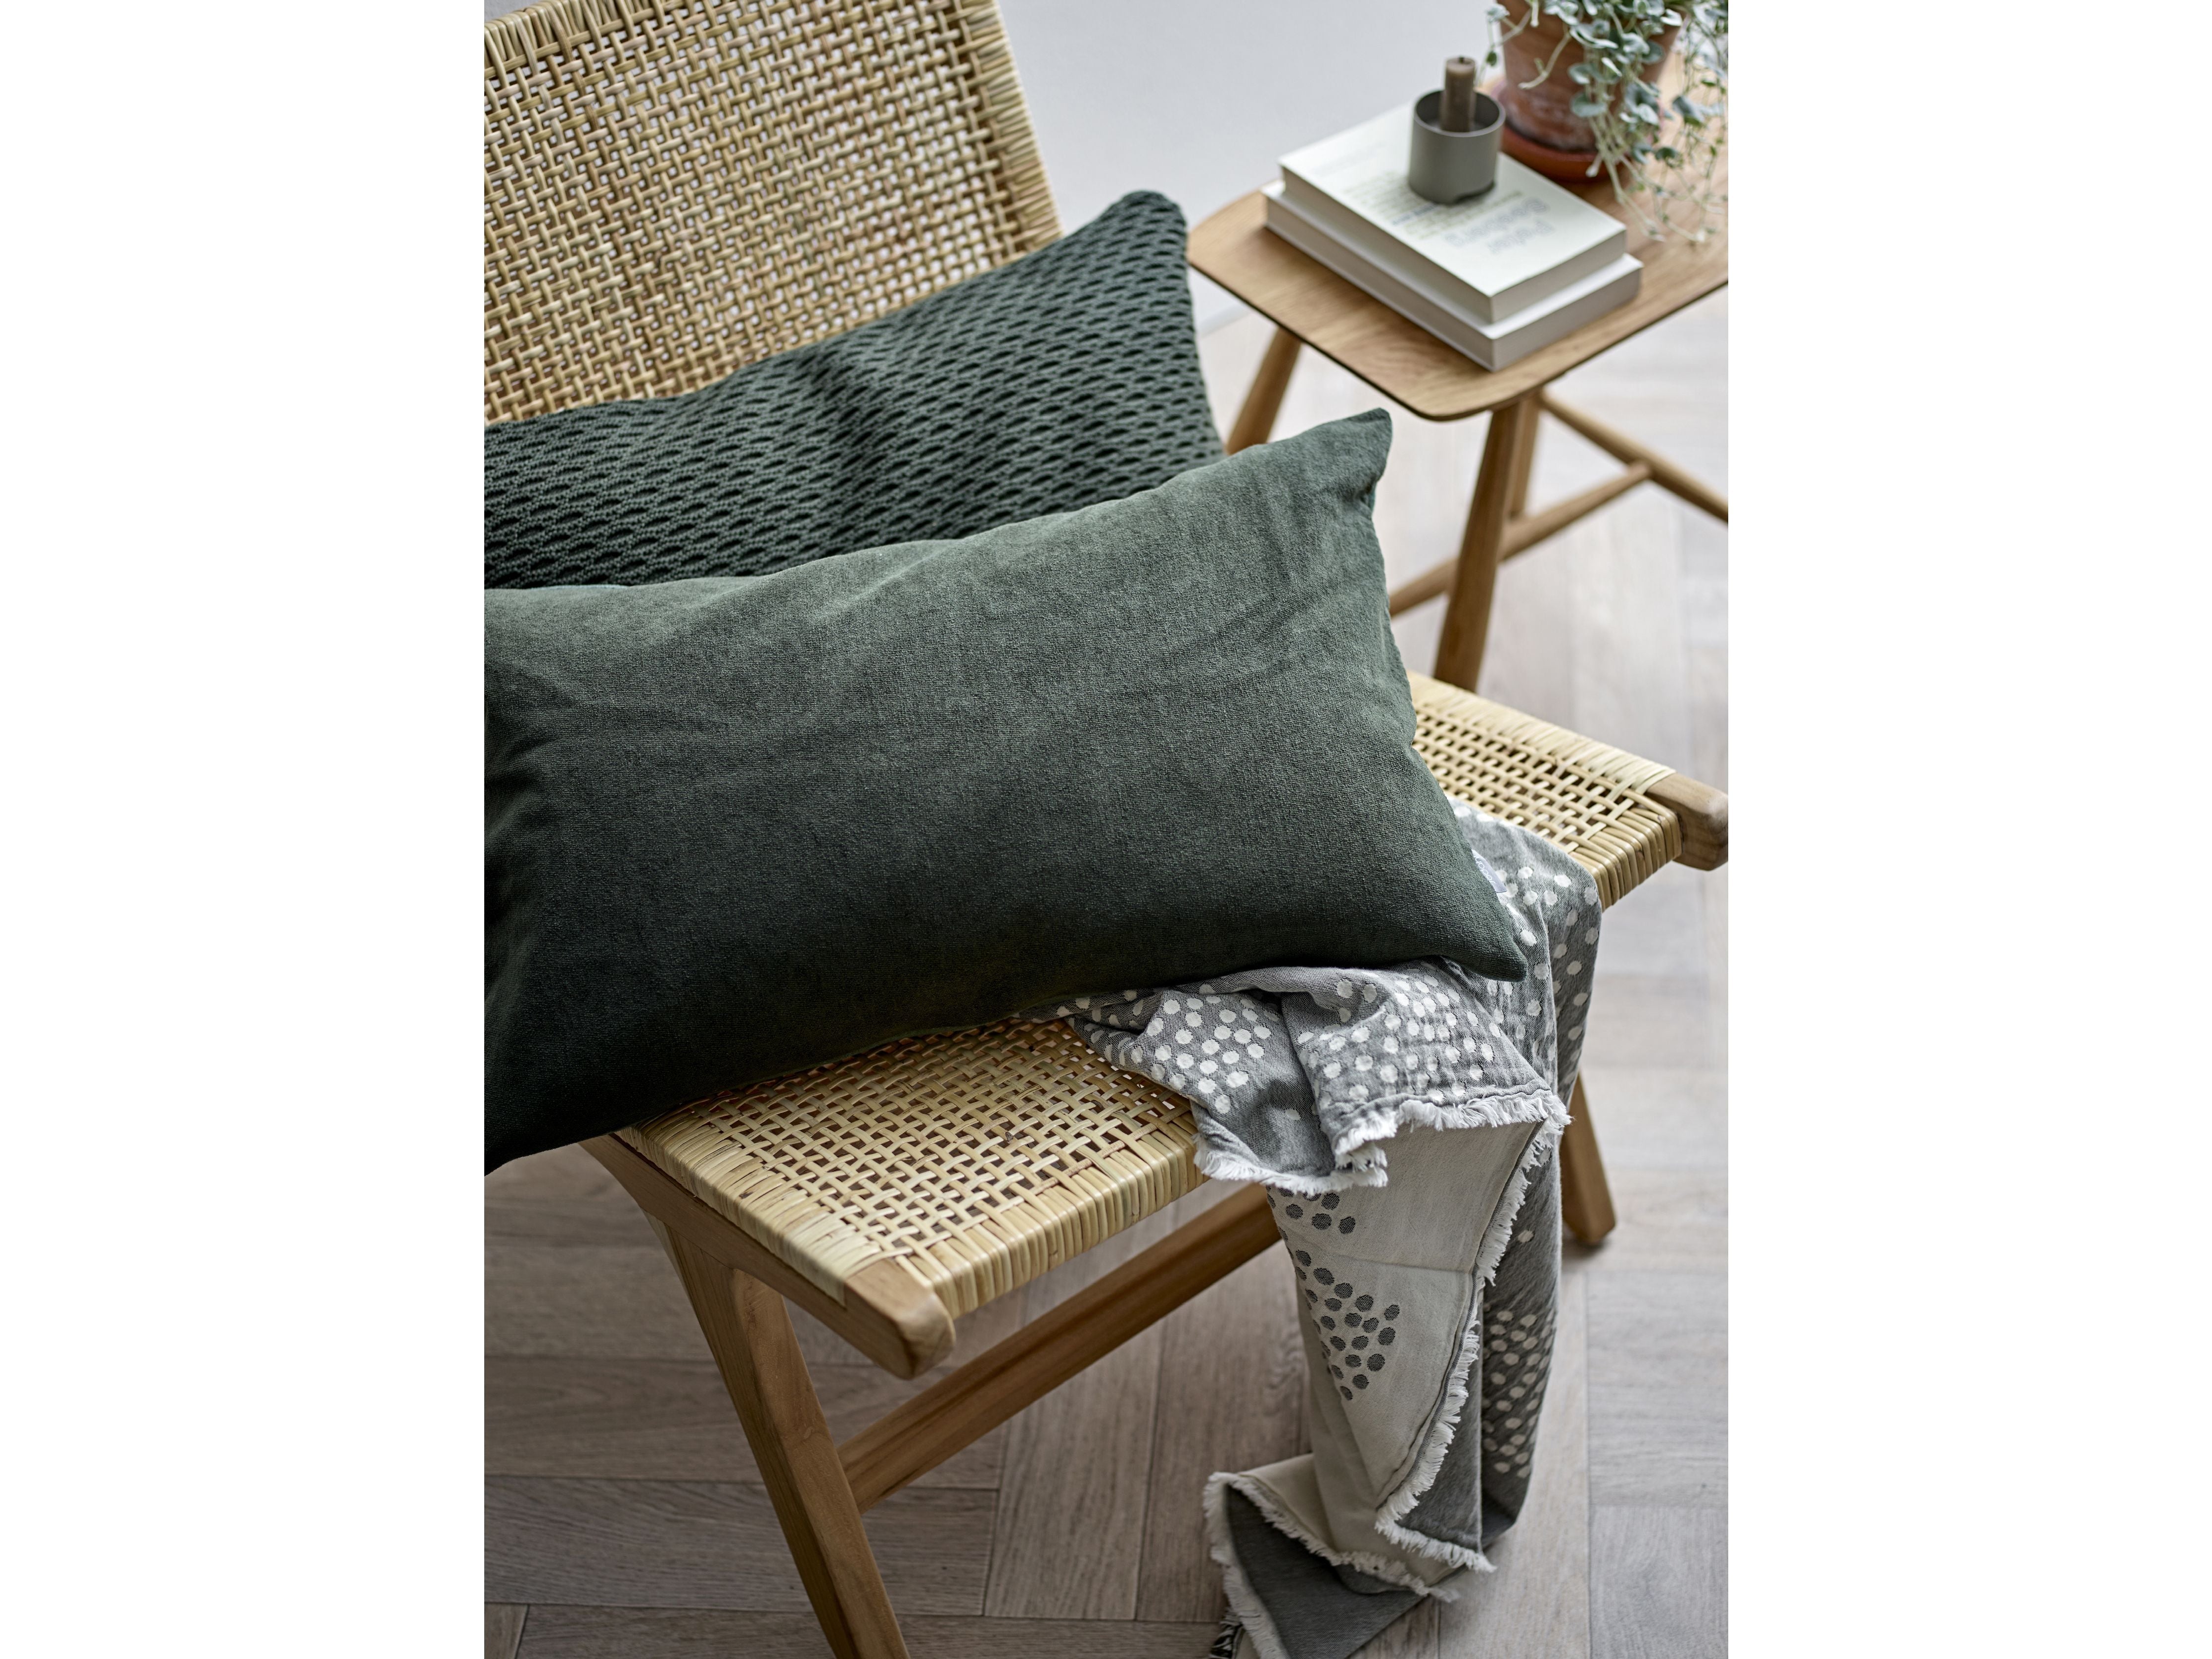 Södahl Wave Knit Cushion Cover 40x60 cm, Forest Green